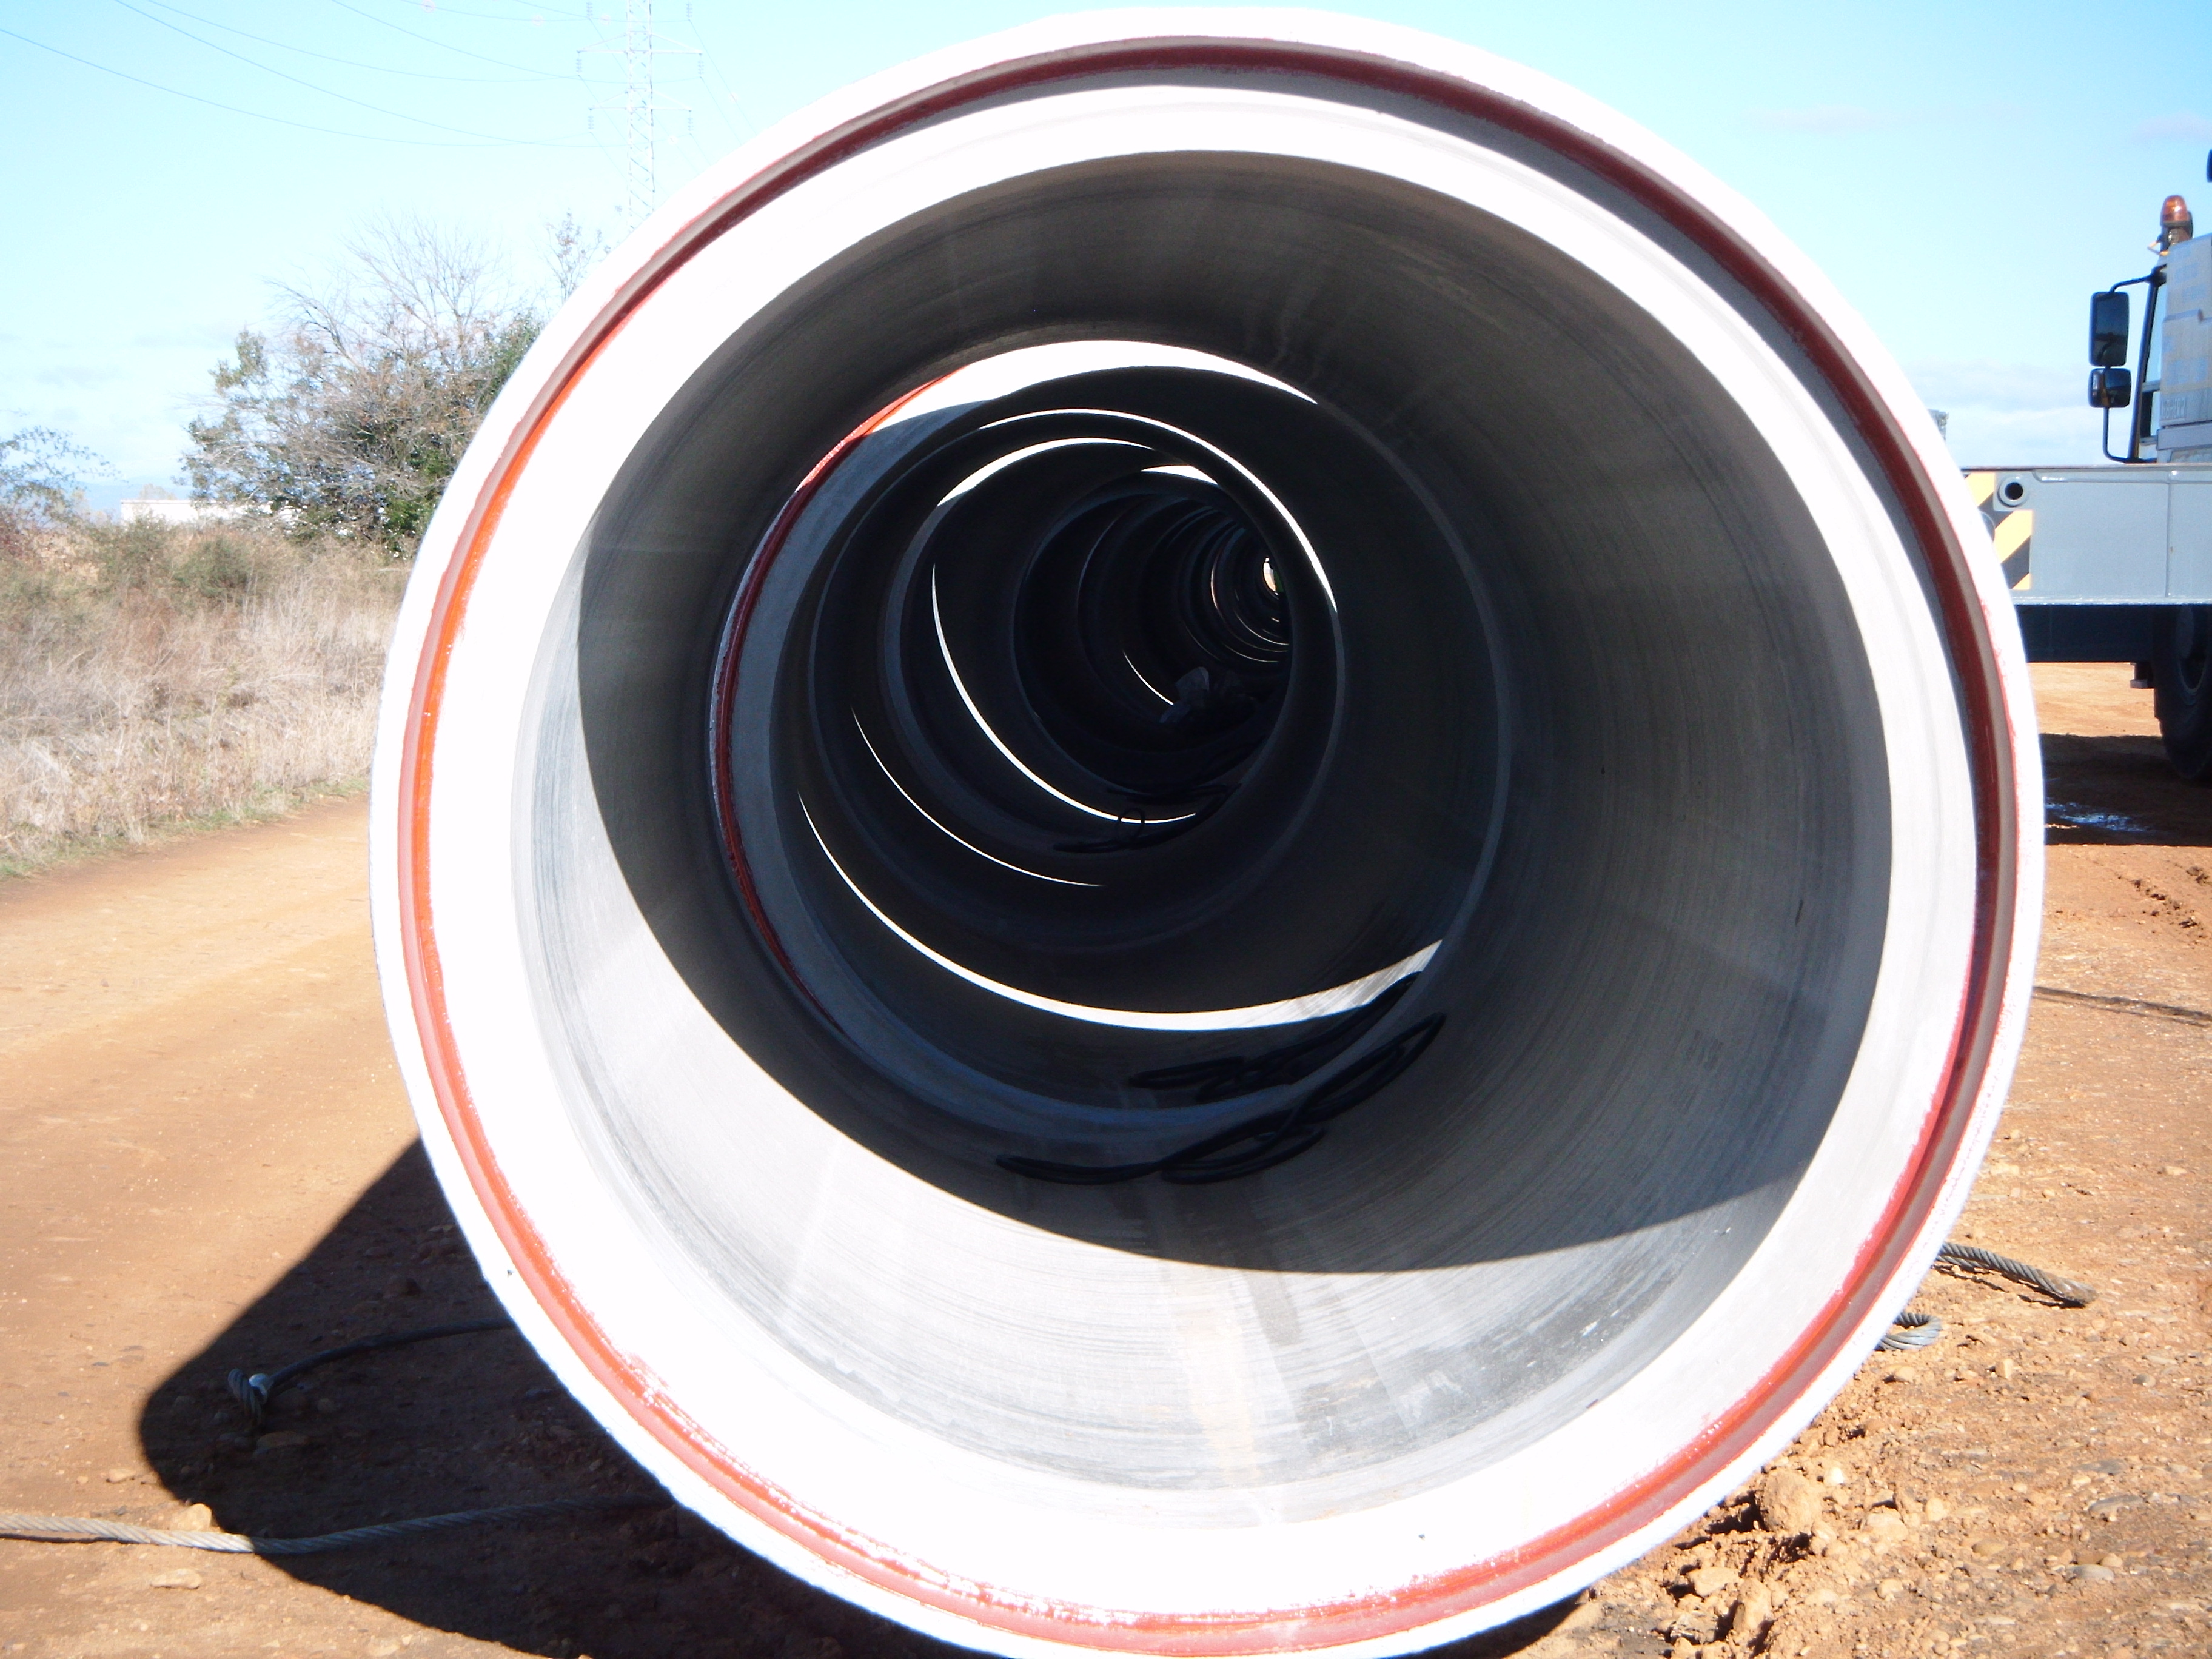 PREFABRICADOS DELTA HAS SUPPLIED MORE THAN 2000 KM PIPE IN ITS 45 YEARS OF ACTIVITY